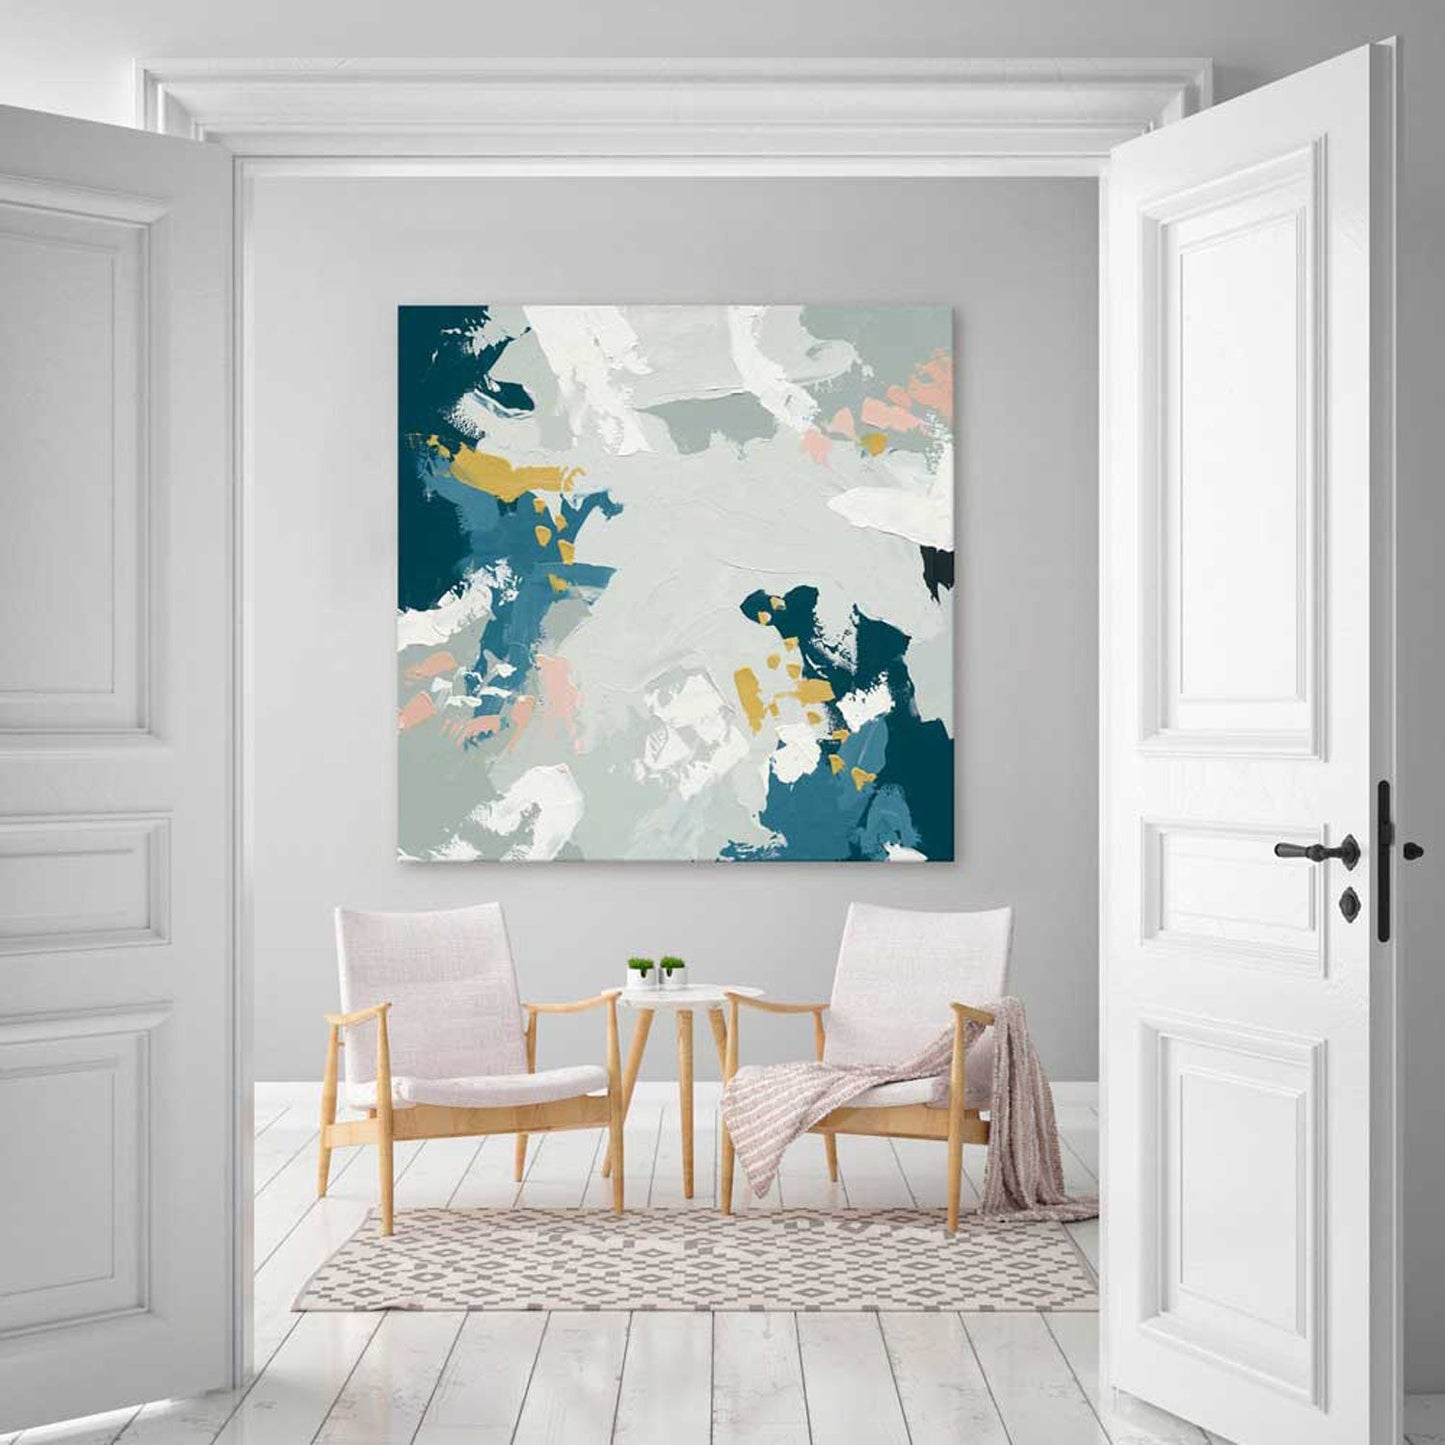 The Space Between Us Canvas Wall Art